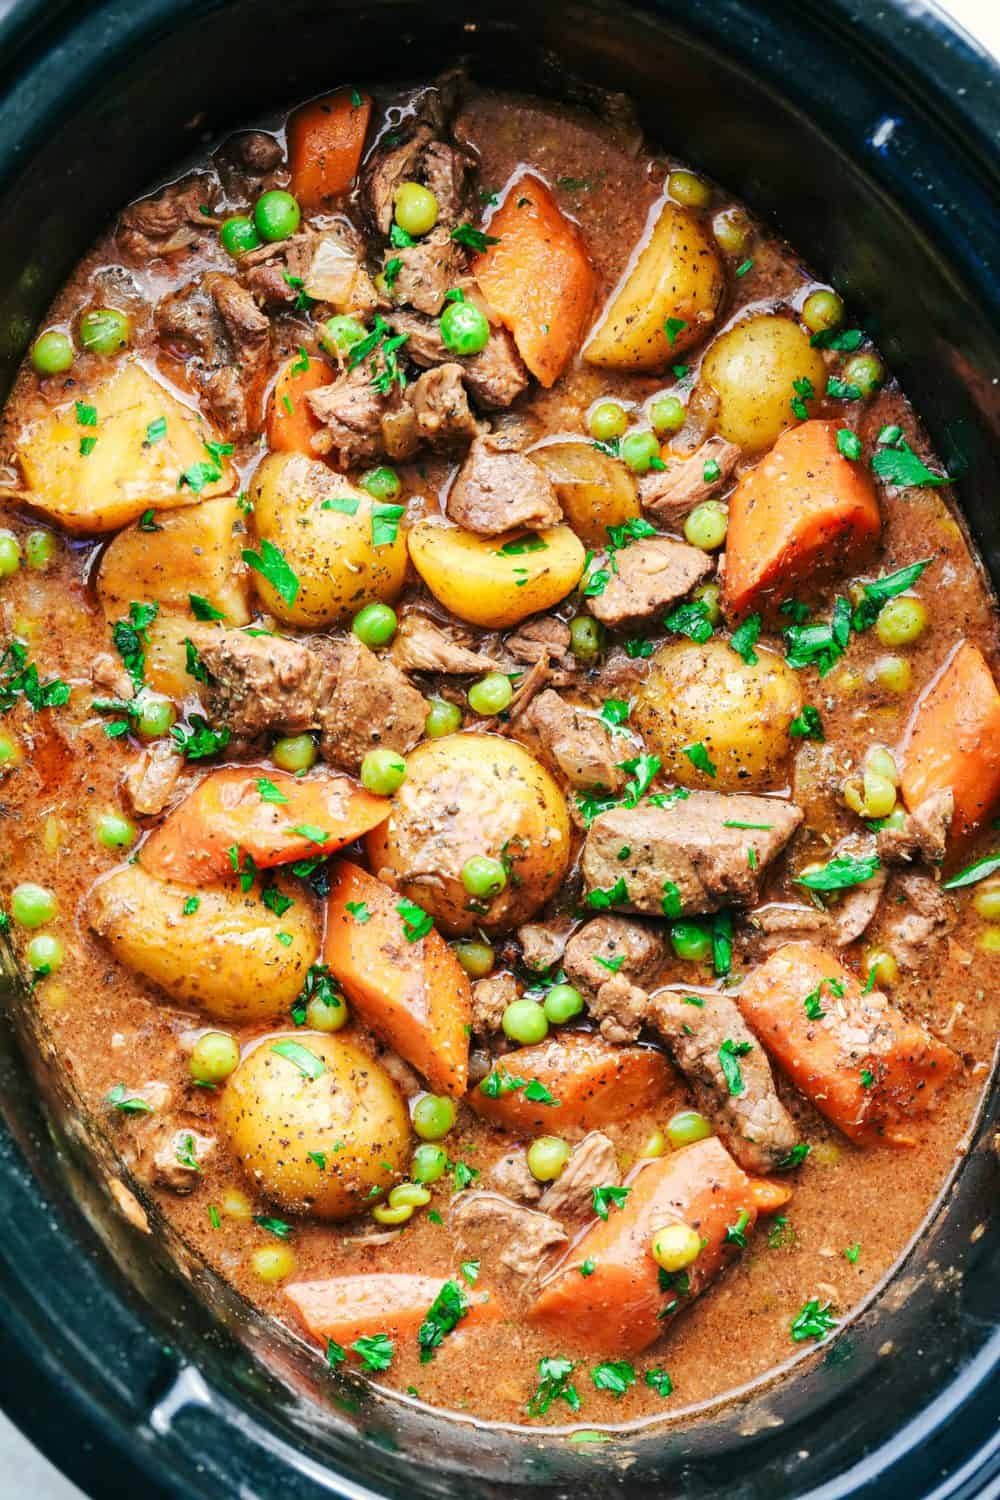 38 Easy Slow Cooker Recipes For Dinner | recipecritic